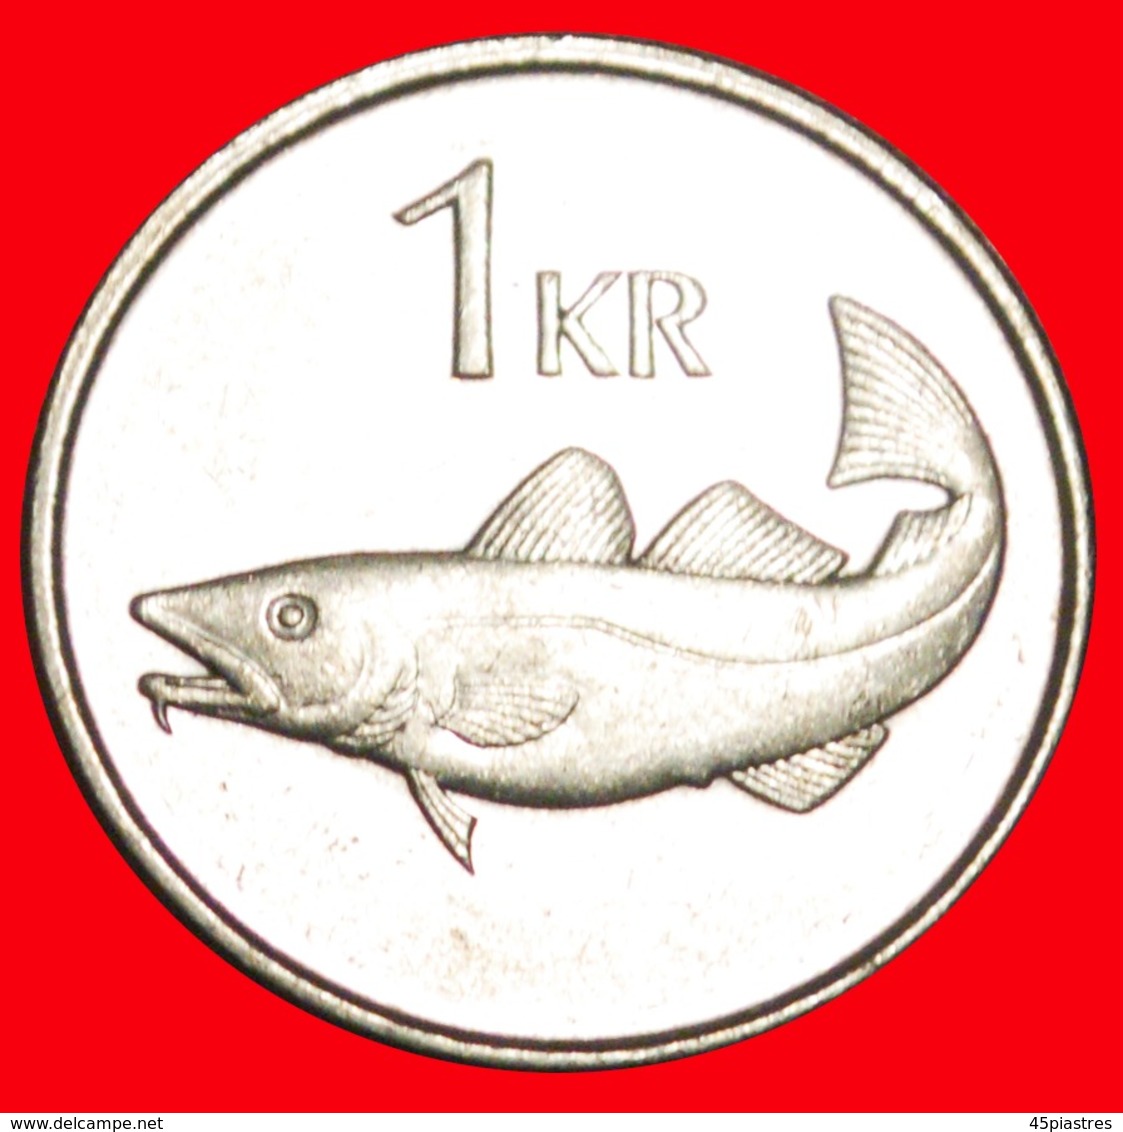 + GREAT BRITAIN FISH (1989-2011): ICELAND ★ 1 KRONE 1989 MINT LUSTER! LOW START ★ NO RESERVE! - Iceland